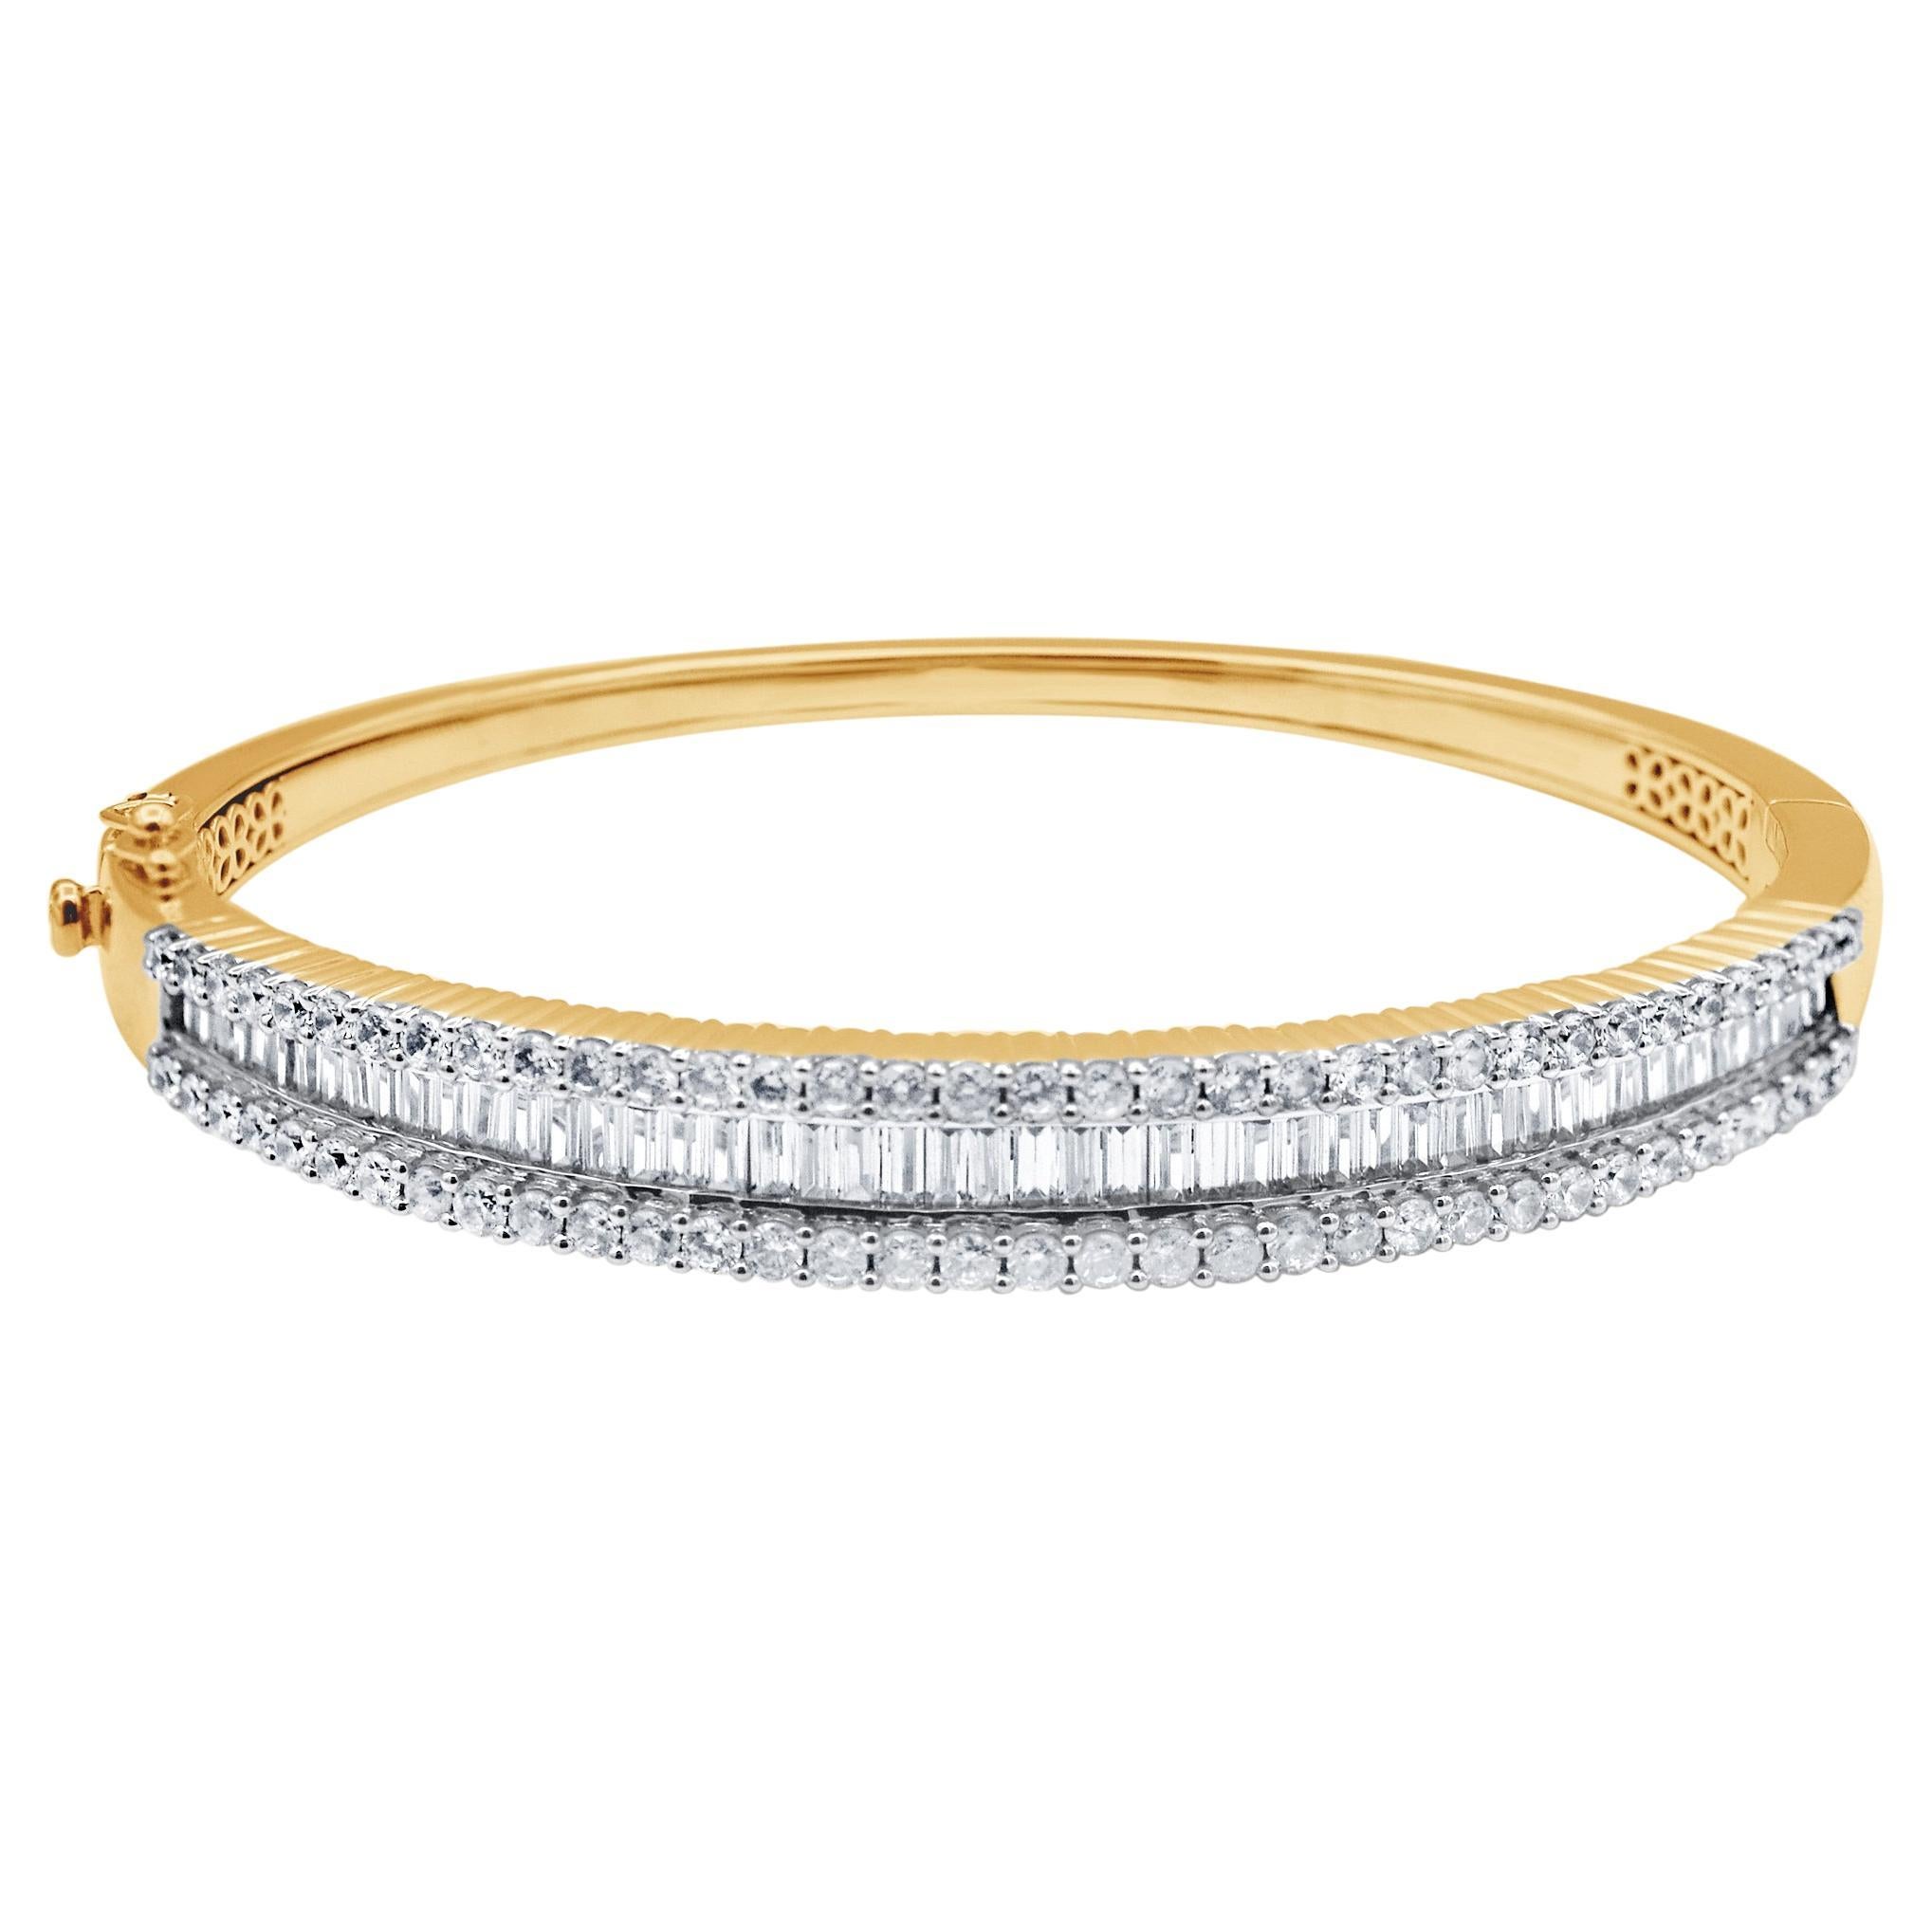 TJD 5.0 Ct Natural Round & Baguette Diamond Bangle Bracelet in 18KT Yellow Gold For Sale